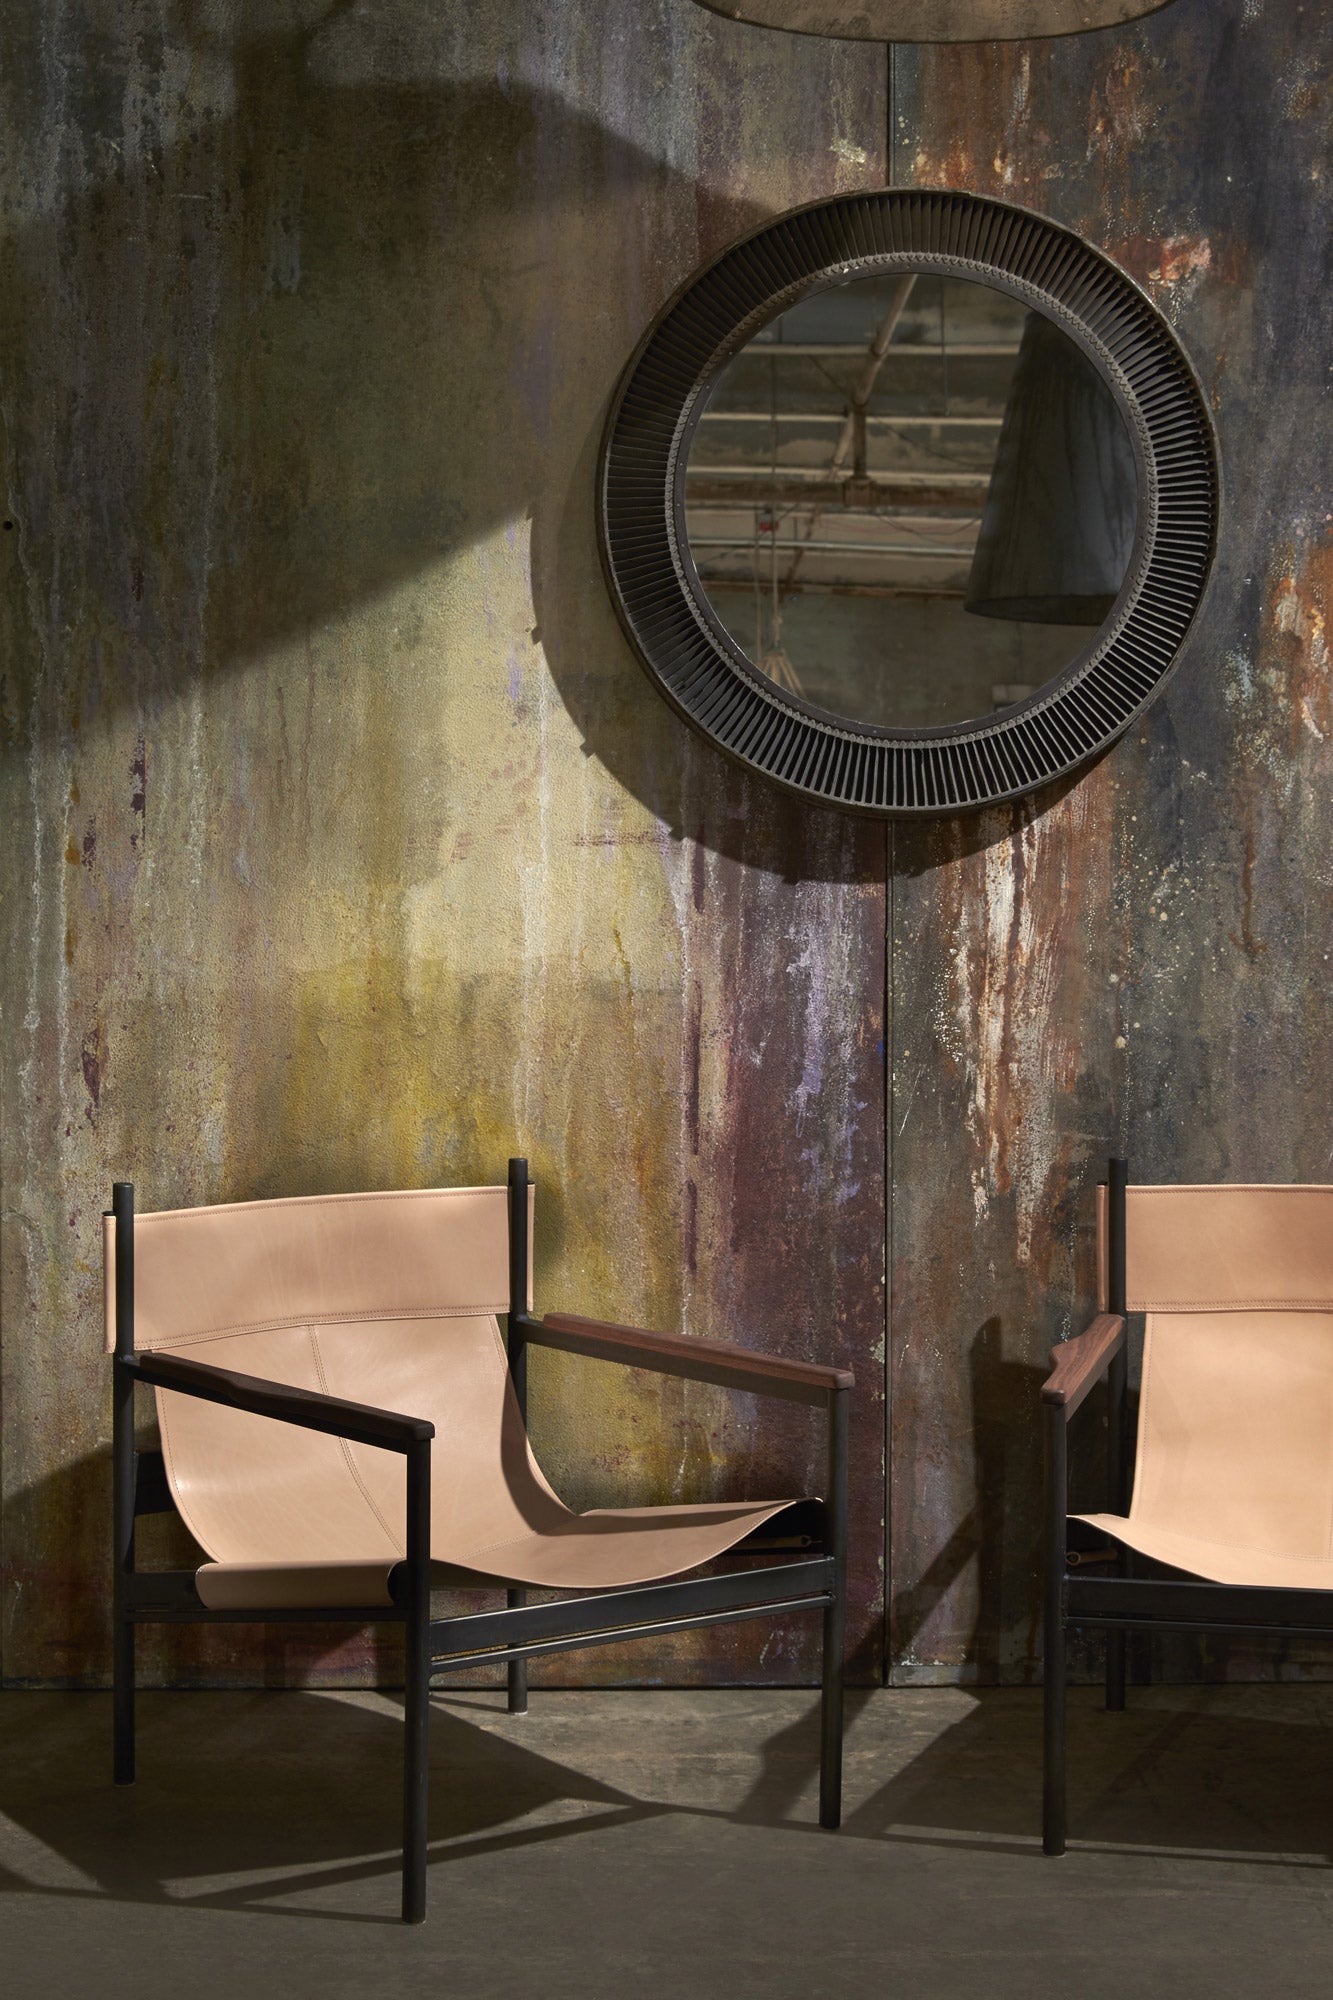  Two chairs in Vachetta Natural. In the background is a concrete wall with a mirror hanging. Photographed in Vachetta Natural. 